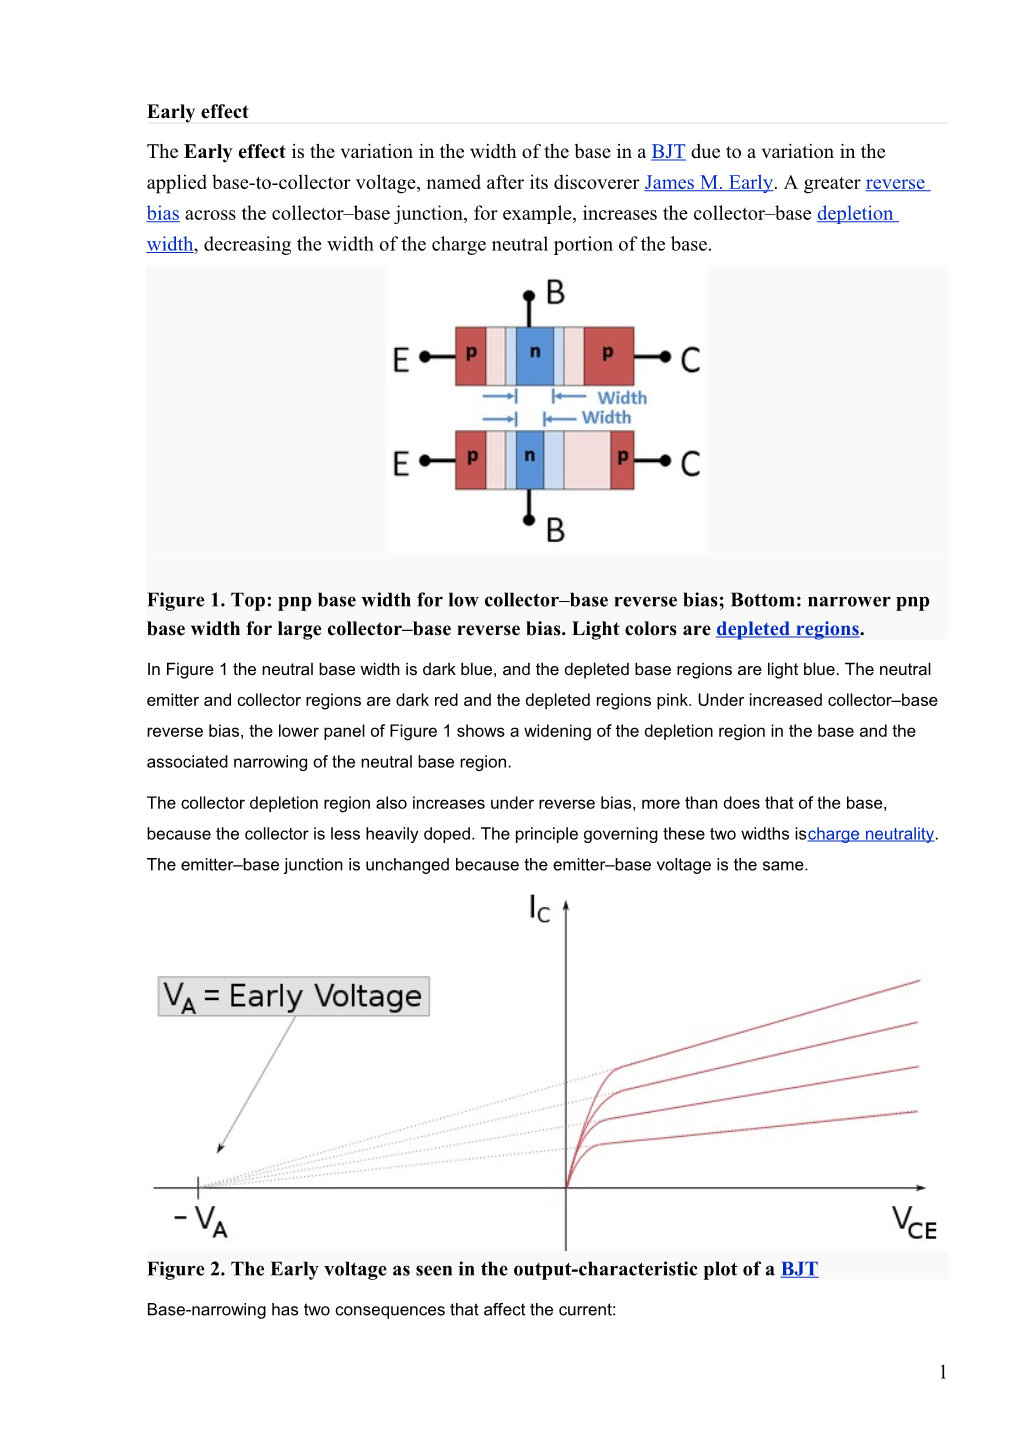 Figure 2. the Early Voltage As Seen in the Output-Characteristic Plot of a BJT